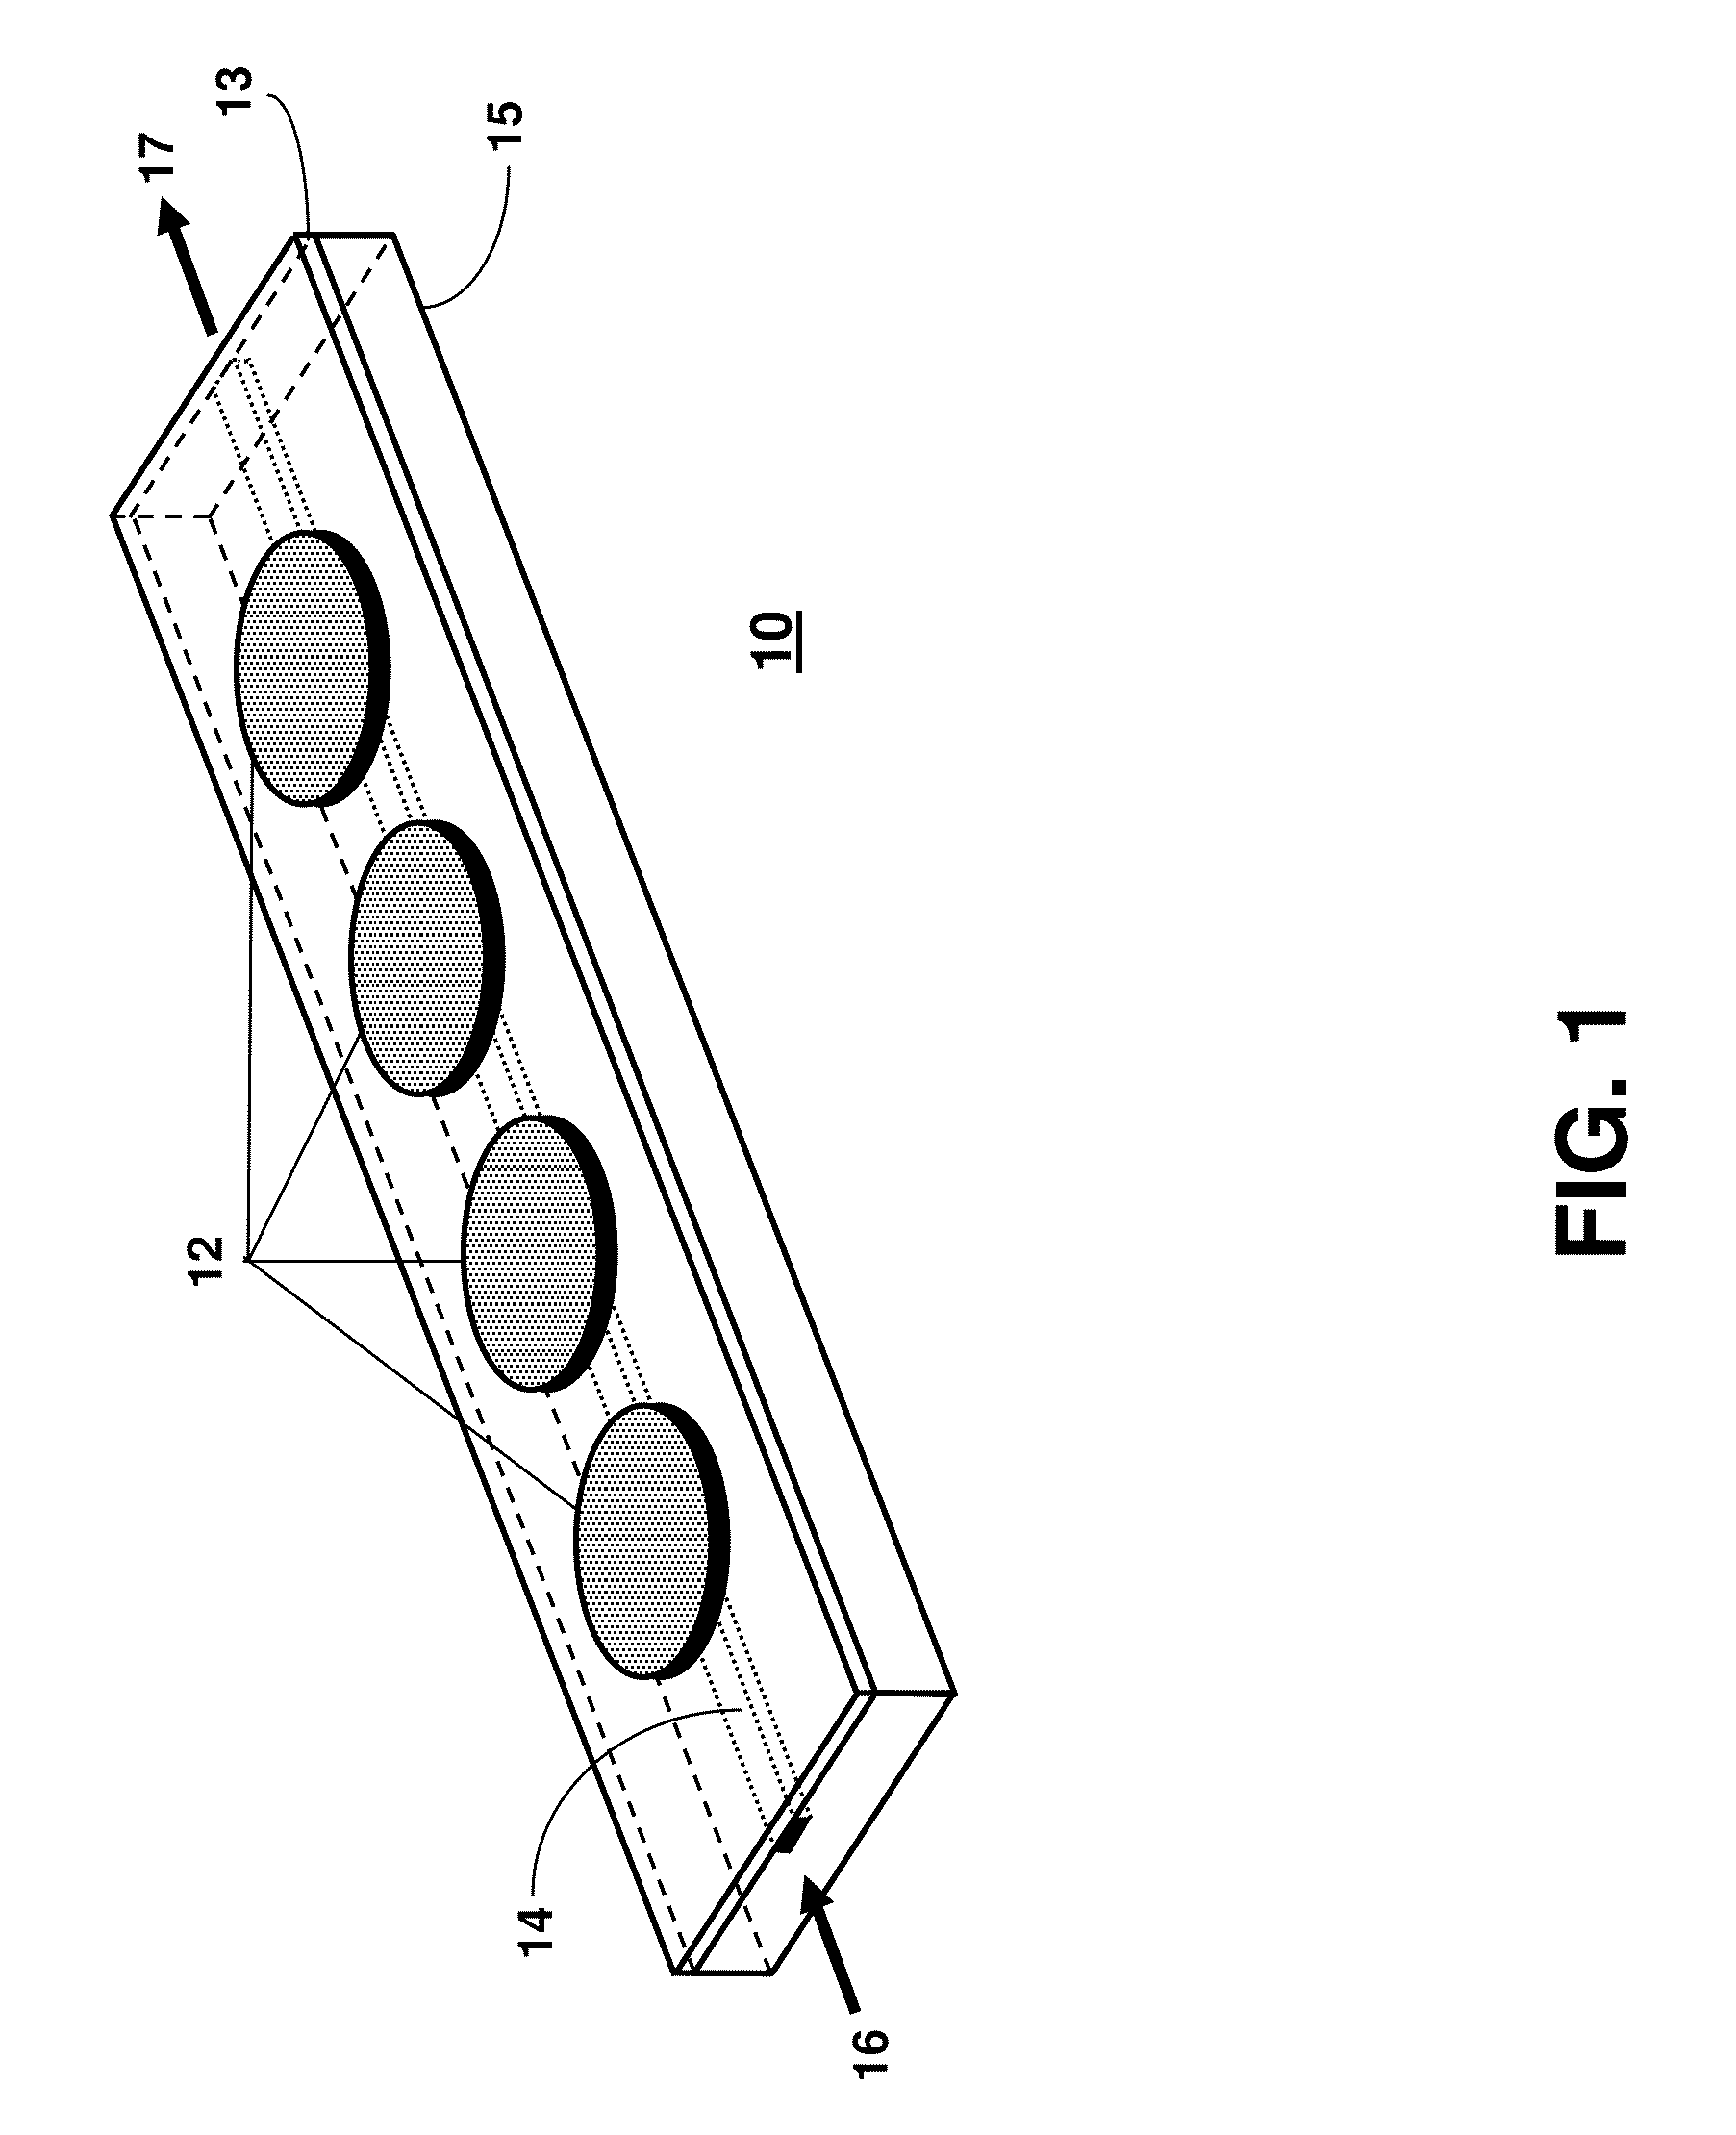 Microfluidic device for acoustic cell lysis